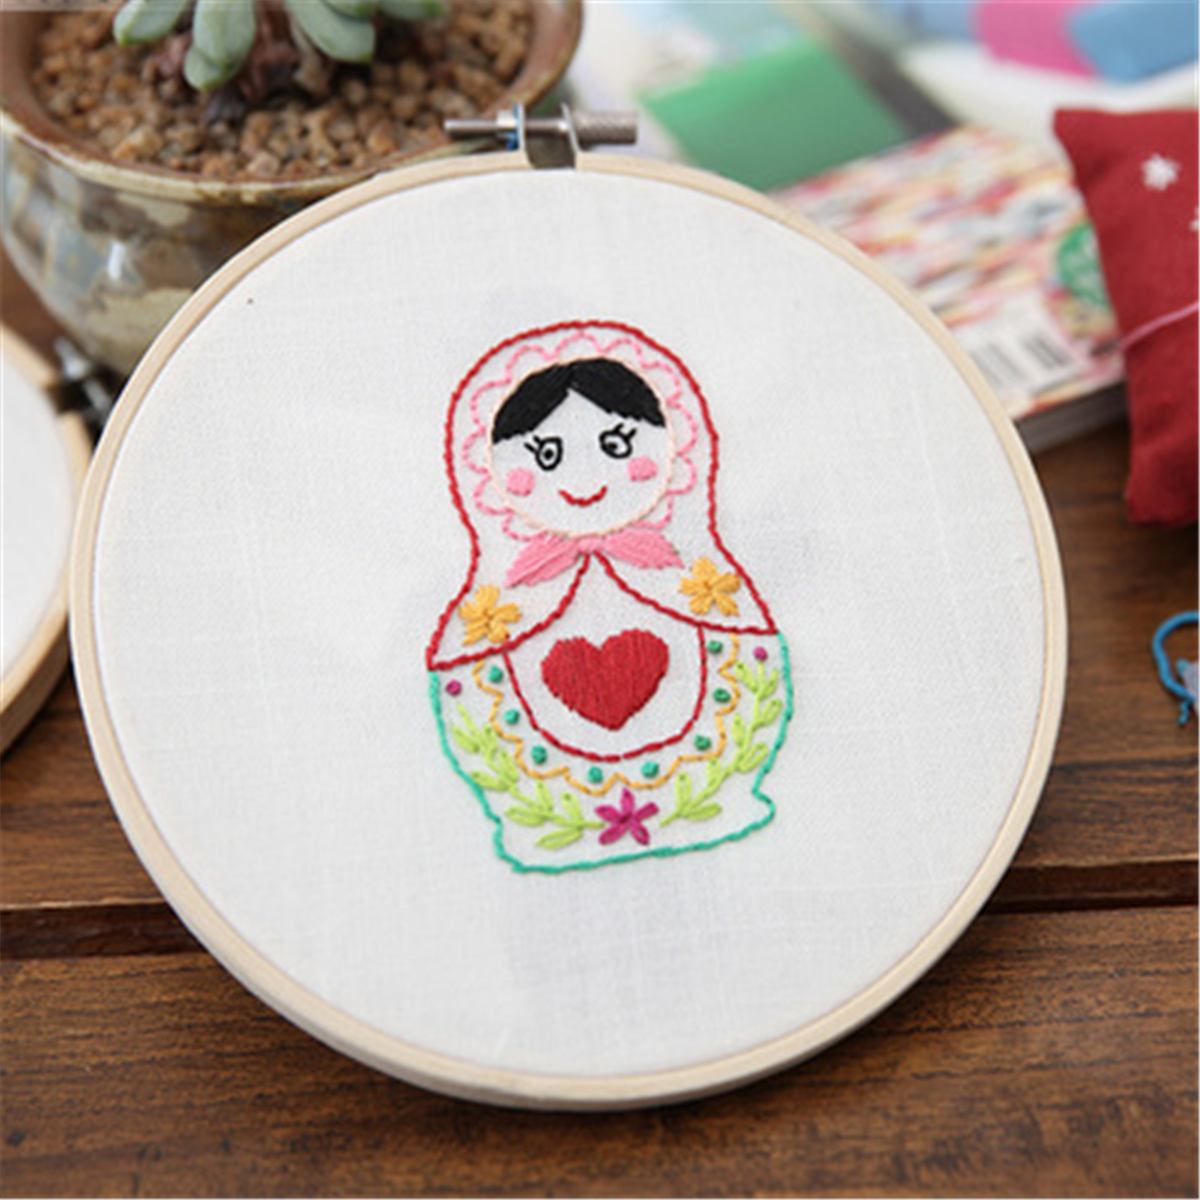 Hand-Embroidery-DIY-Cloth-Arts-Handmade-Cross-Stitch-Hanging-Chinese-Style-Painting-for-Home-Decorat-1688553-9